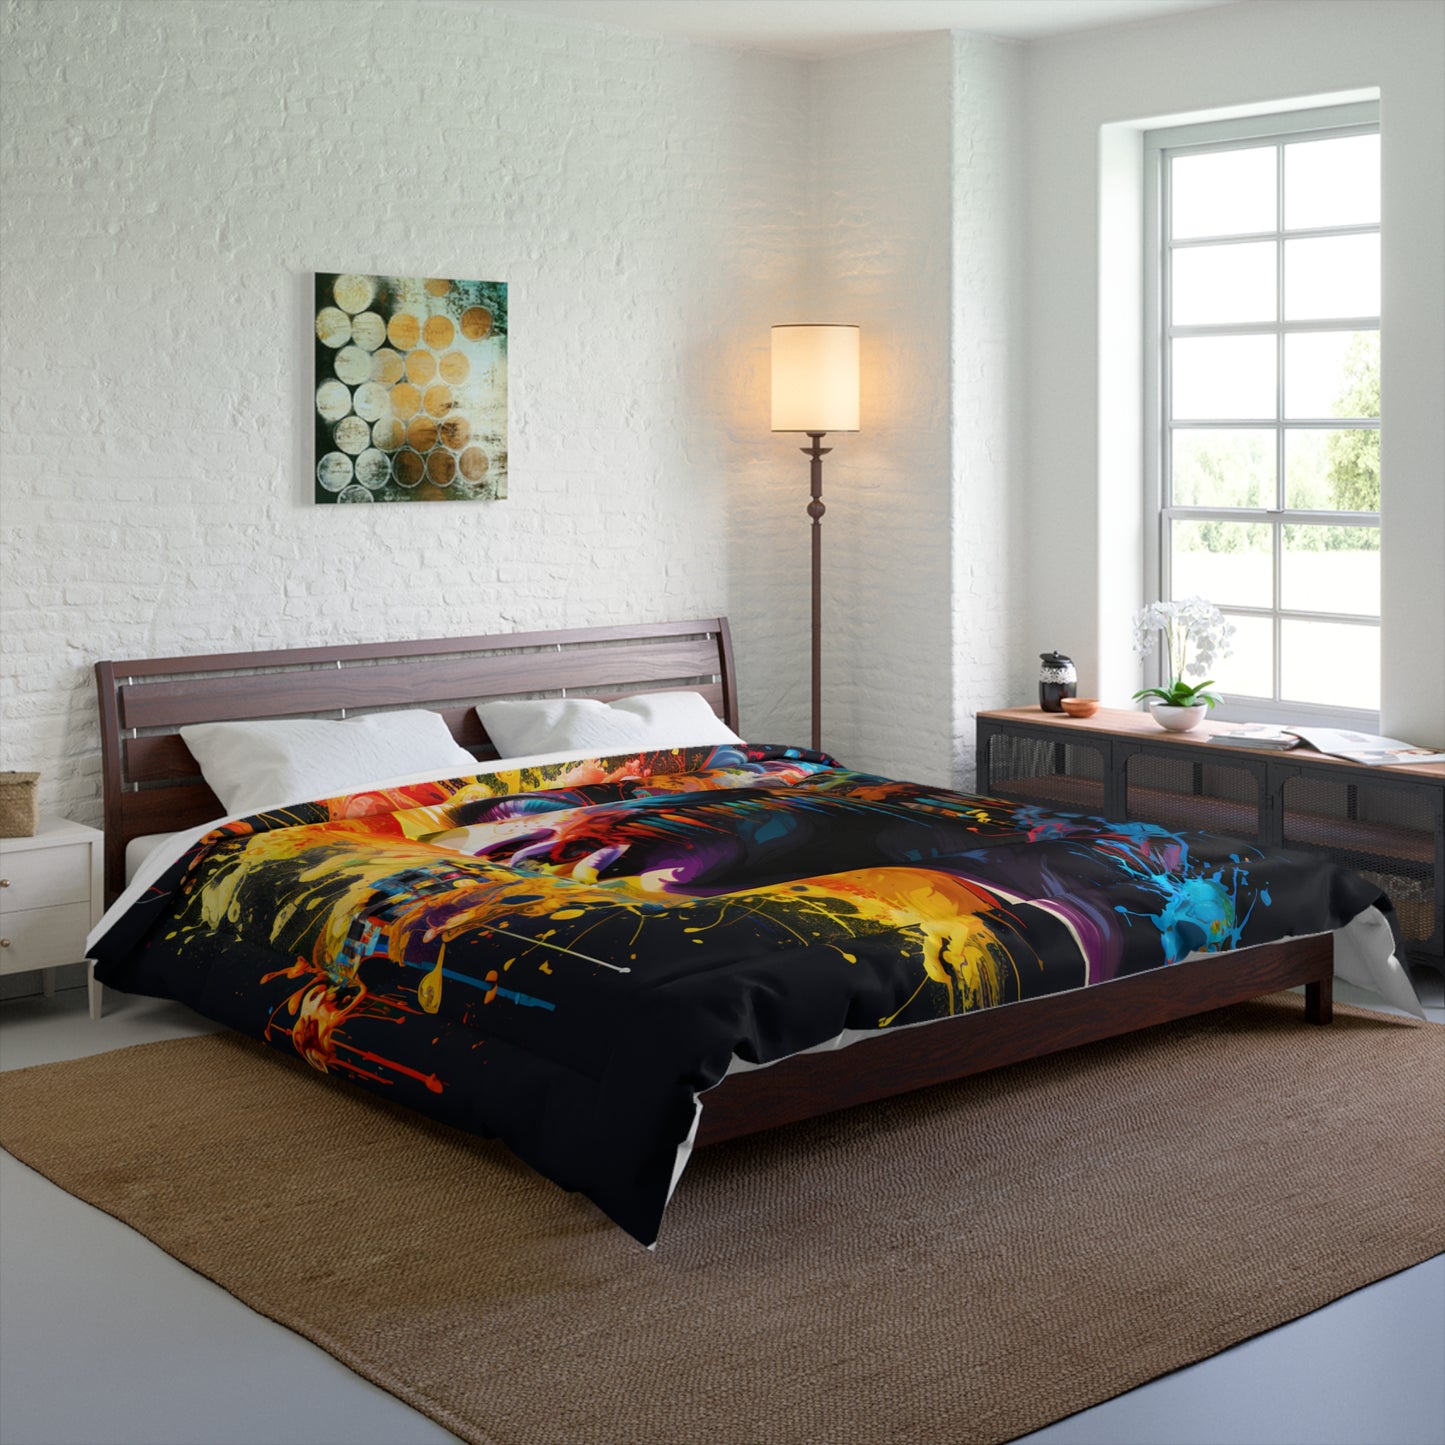 Transform your bedroom into an artistic haven with our Female Singer Drip Ink Art Comforter. Surfboards Design #006. Comfort, creativity, and coastal vibes, curated by Stashbox.ai.